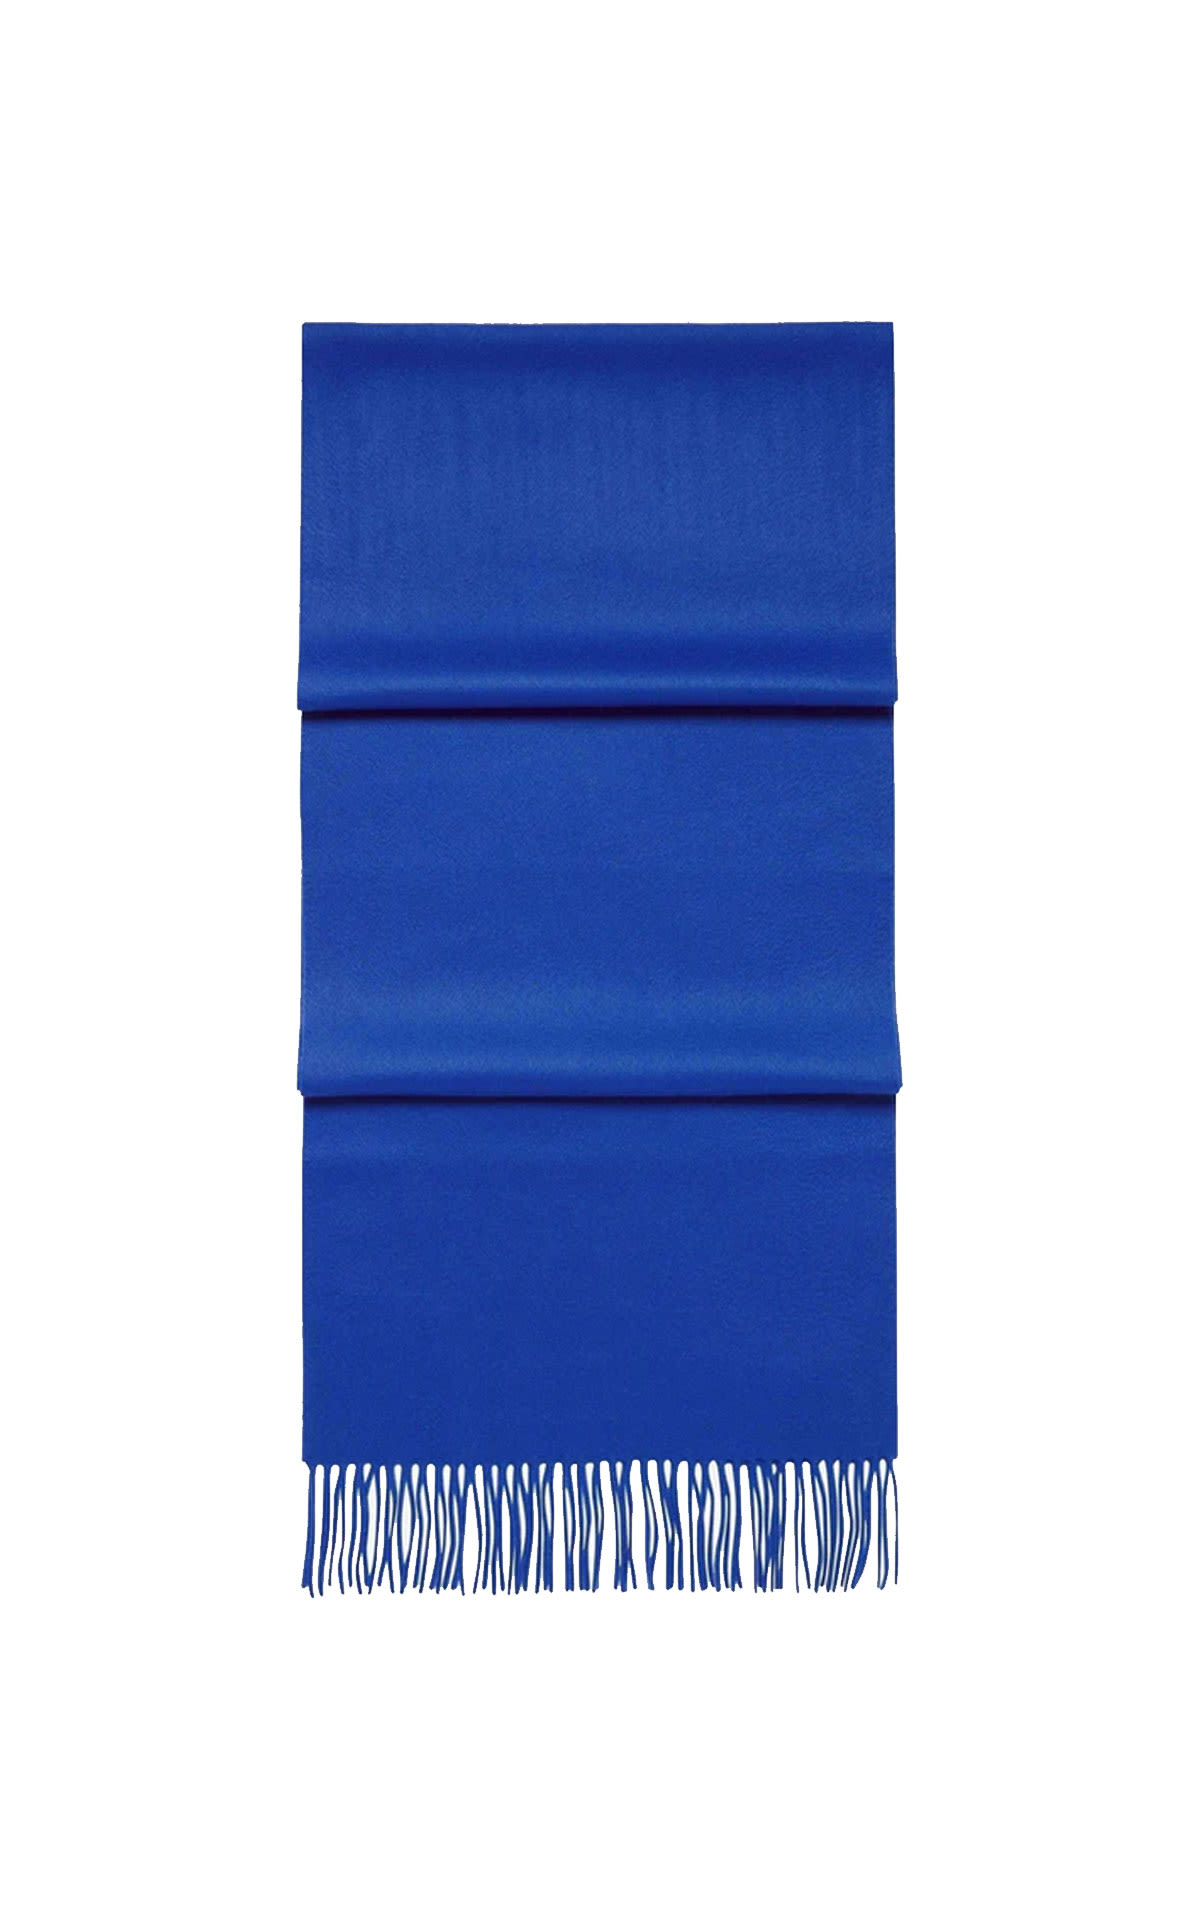 N.Peal Small woven cashmere scarf zephr blue from Bicester Village